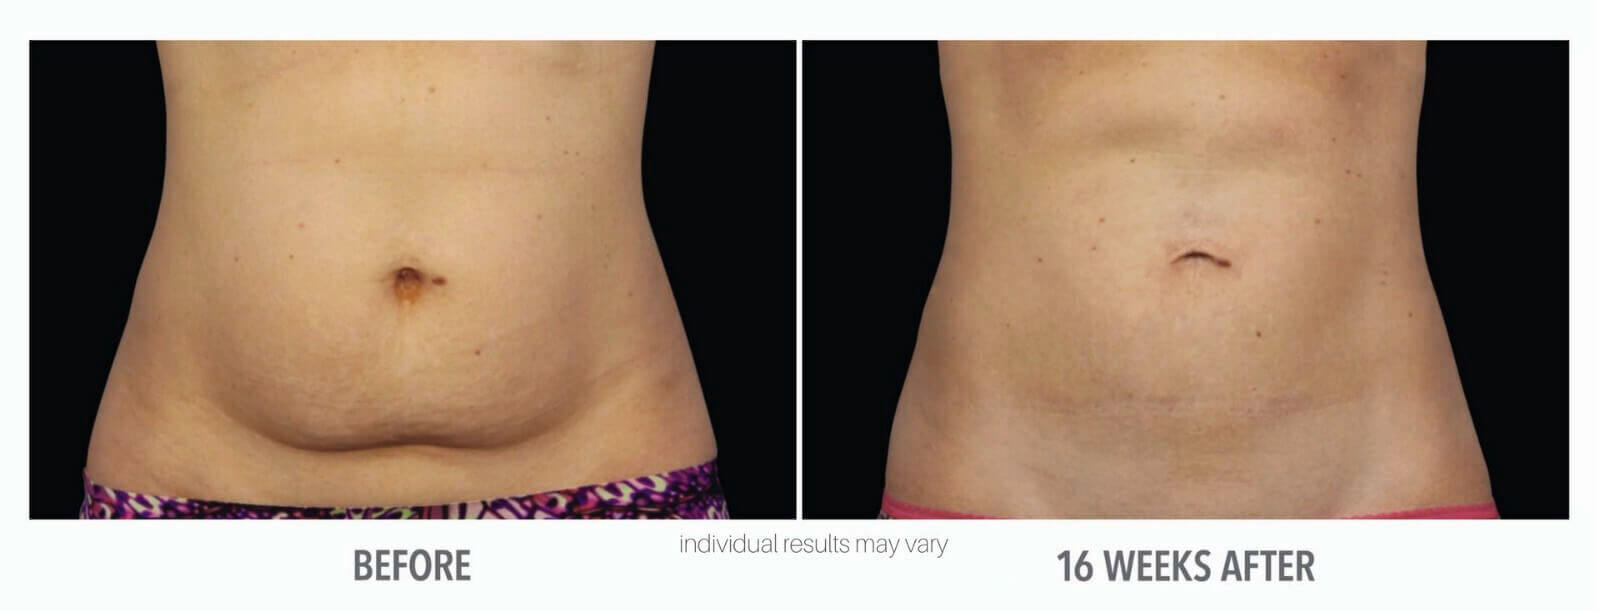 Coolsculpting stomach before after